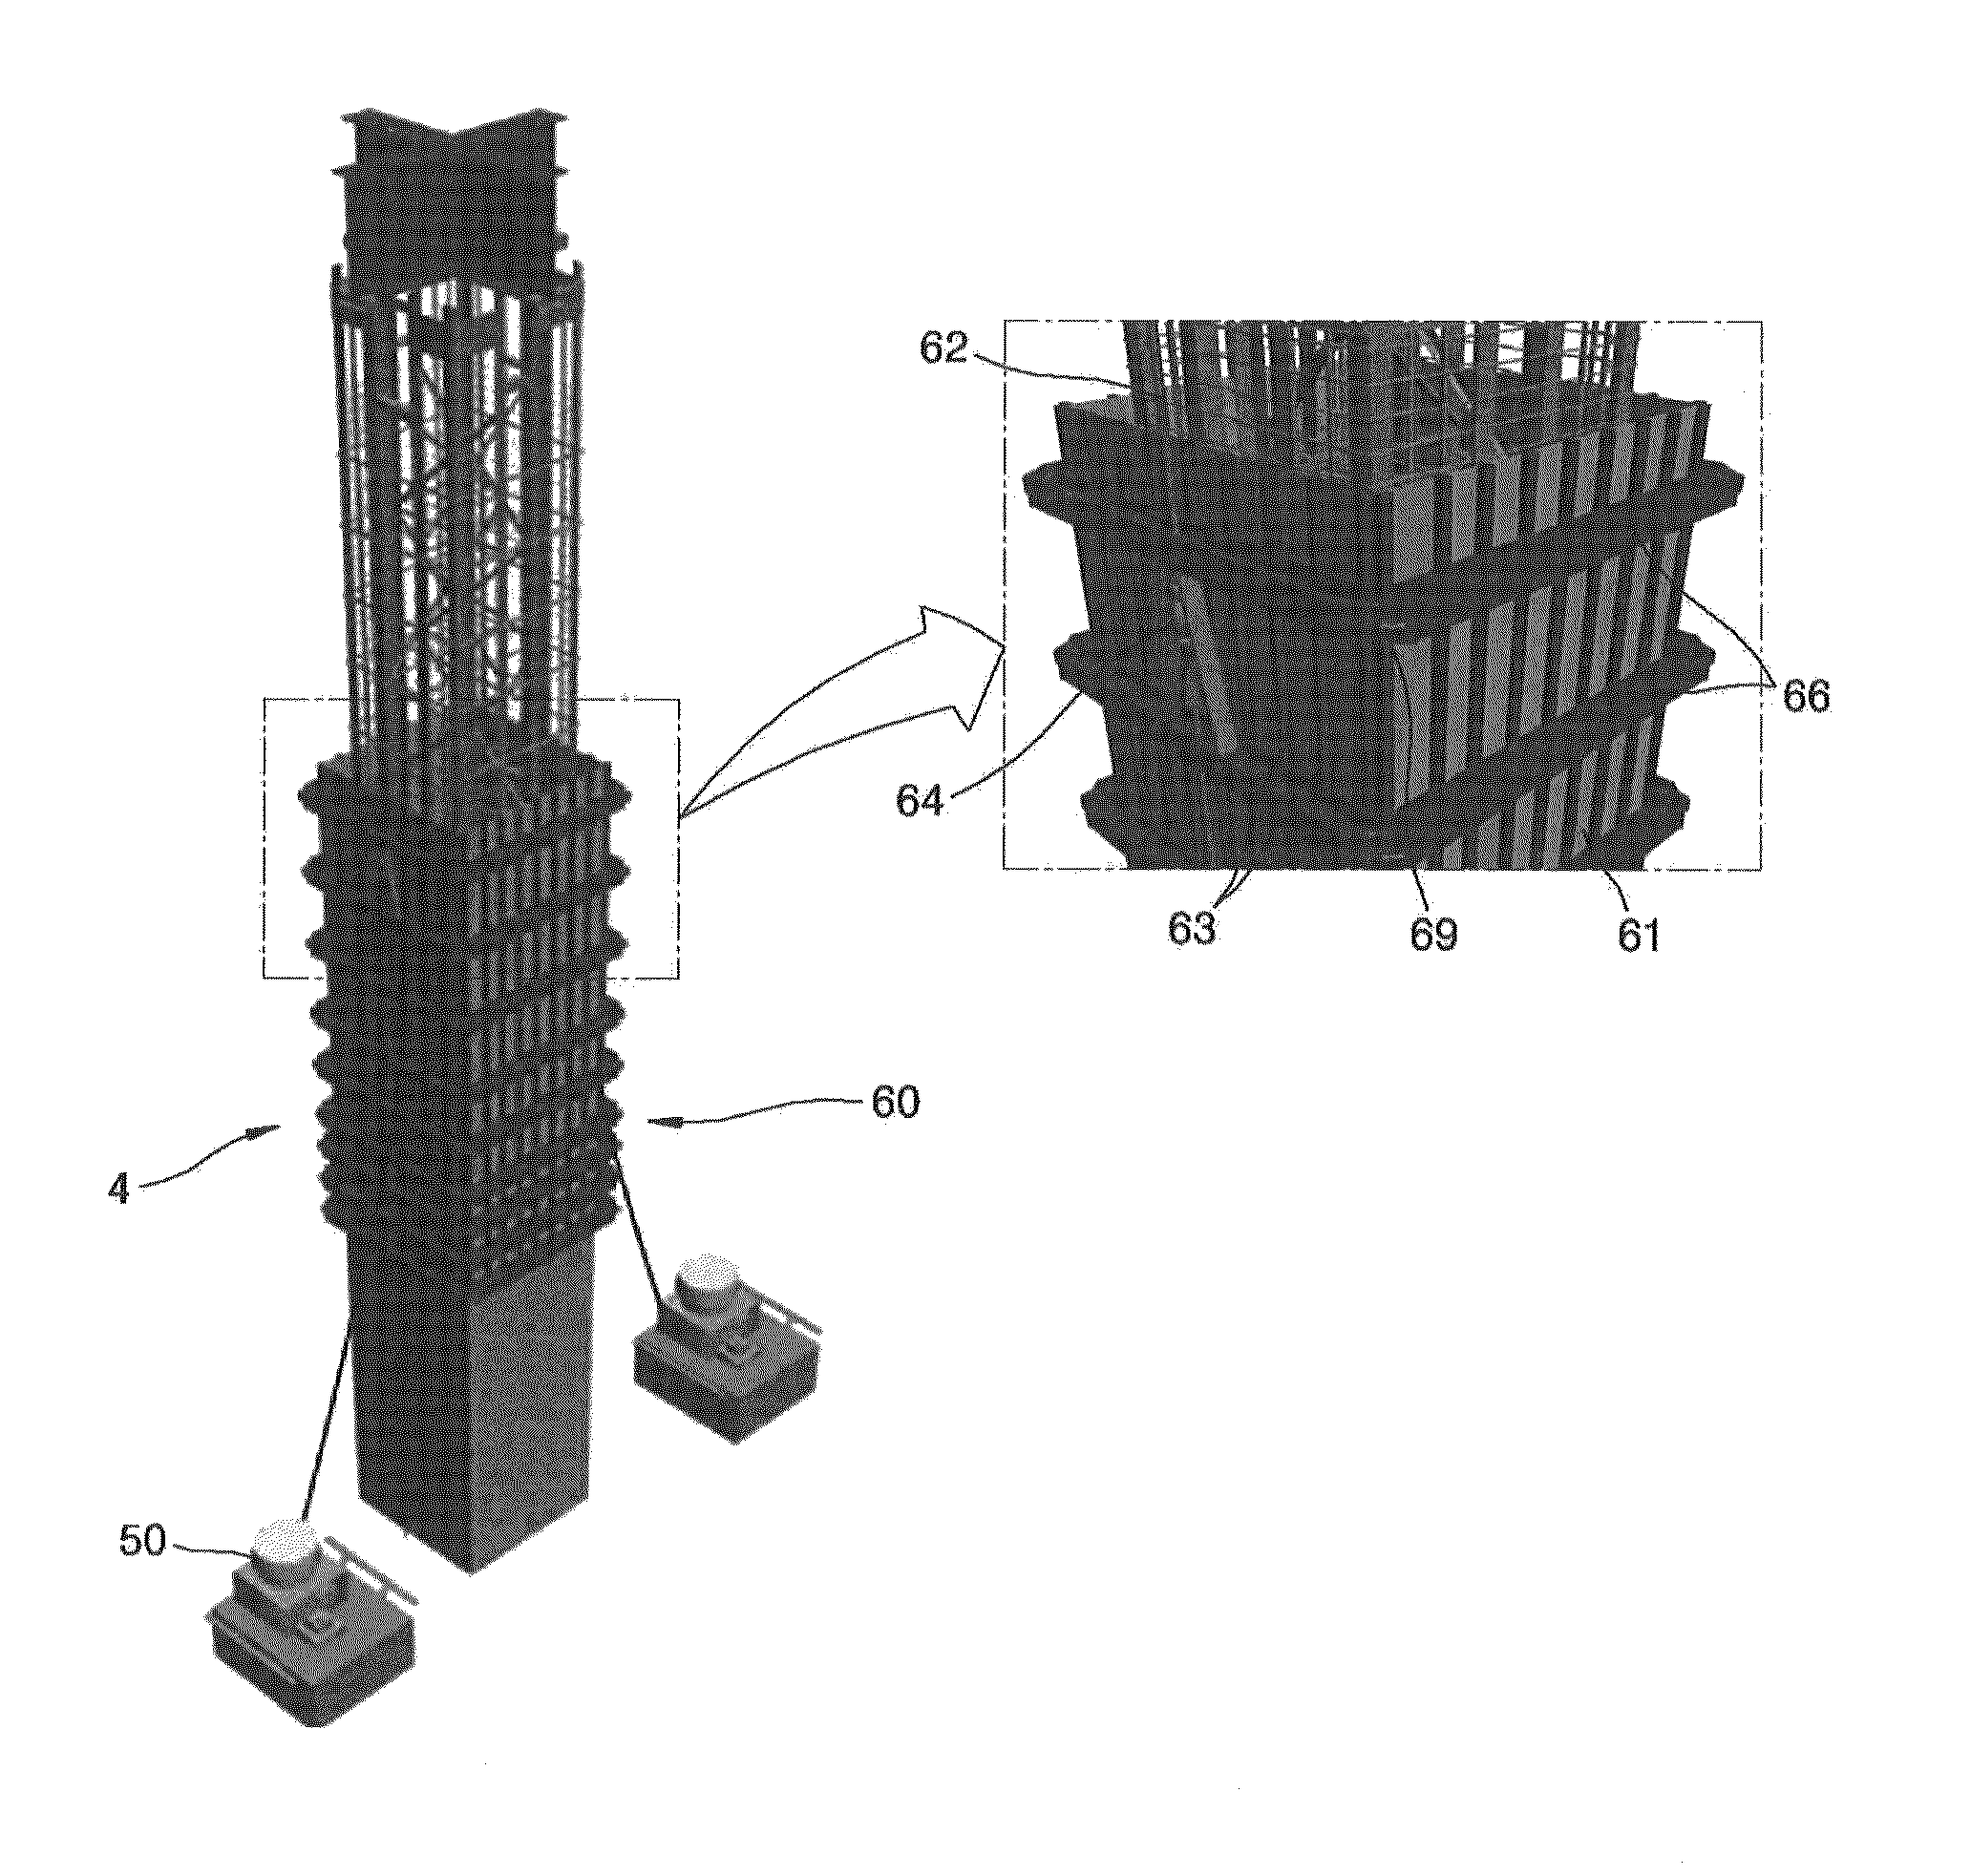 Method of constructing prefabricated steel reinforced concrete (PSRC) column using angle steels and psrc column using angle steels